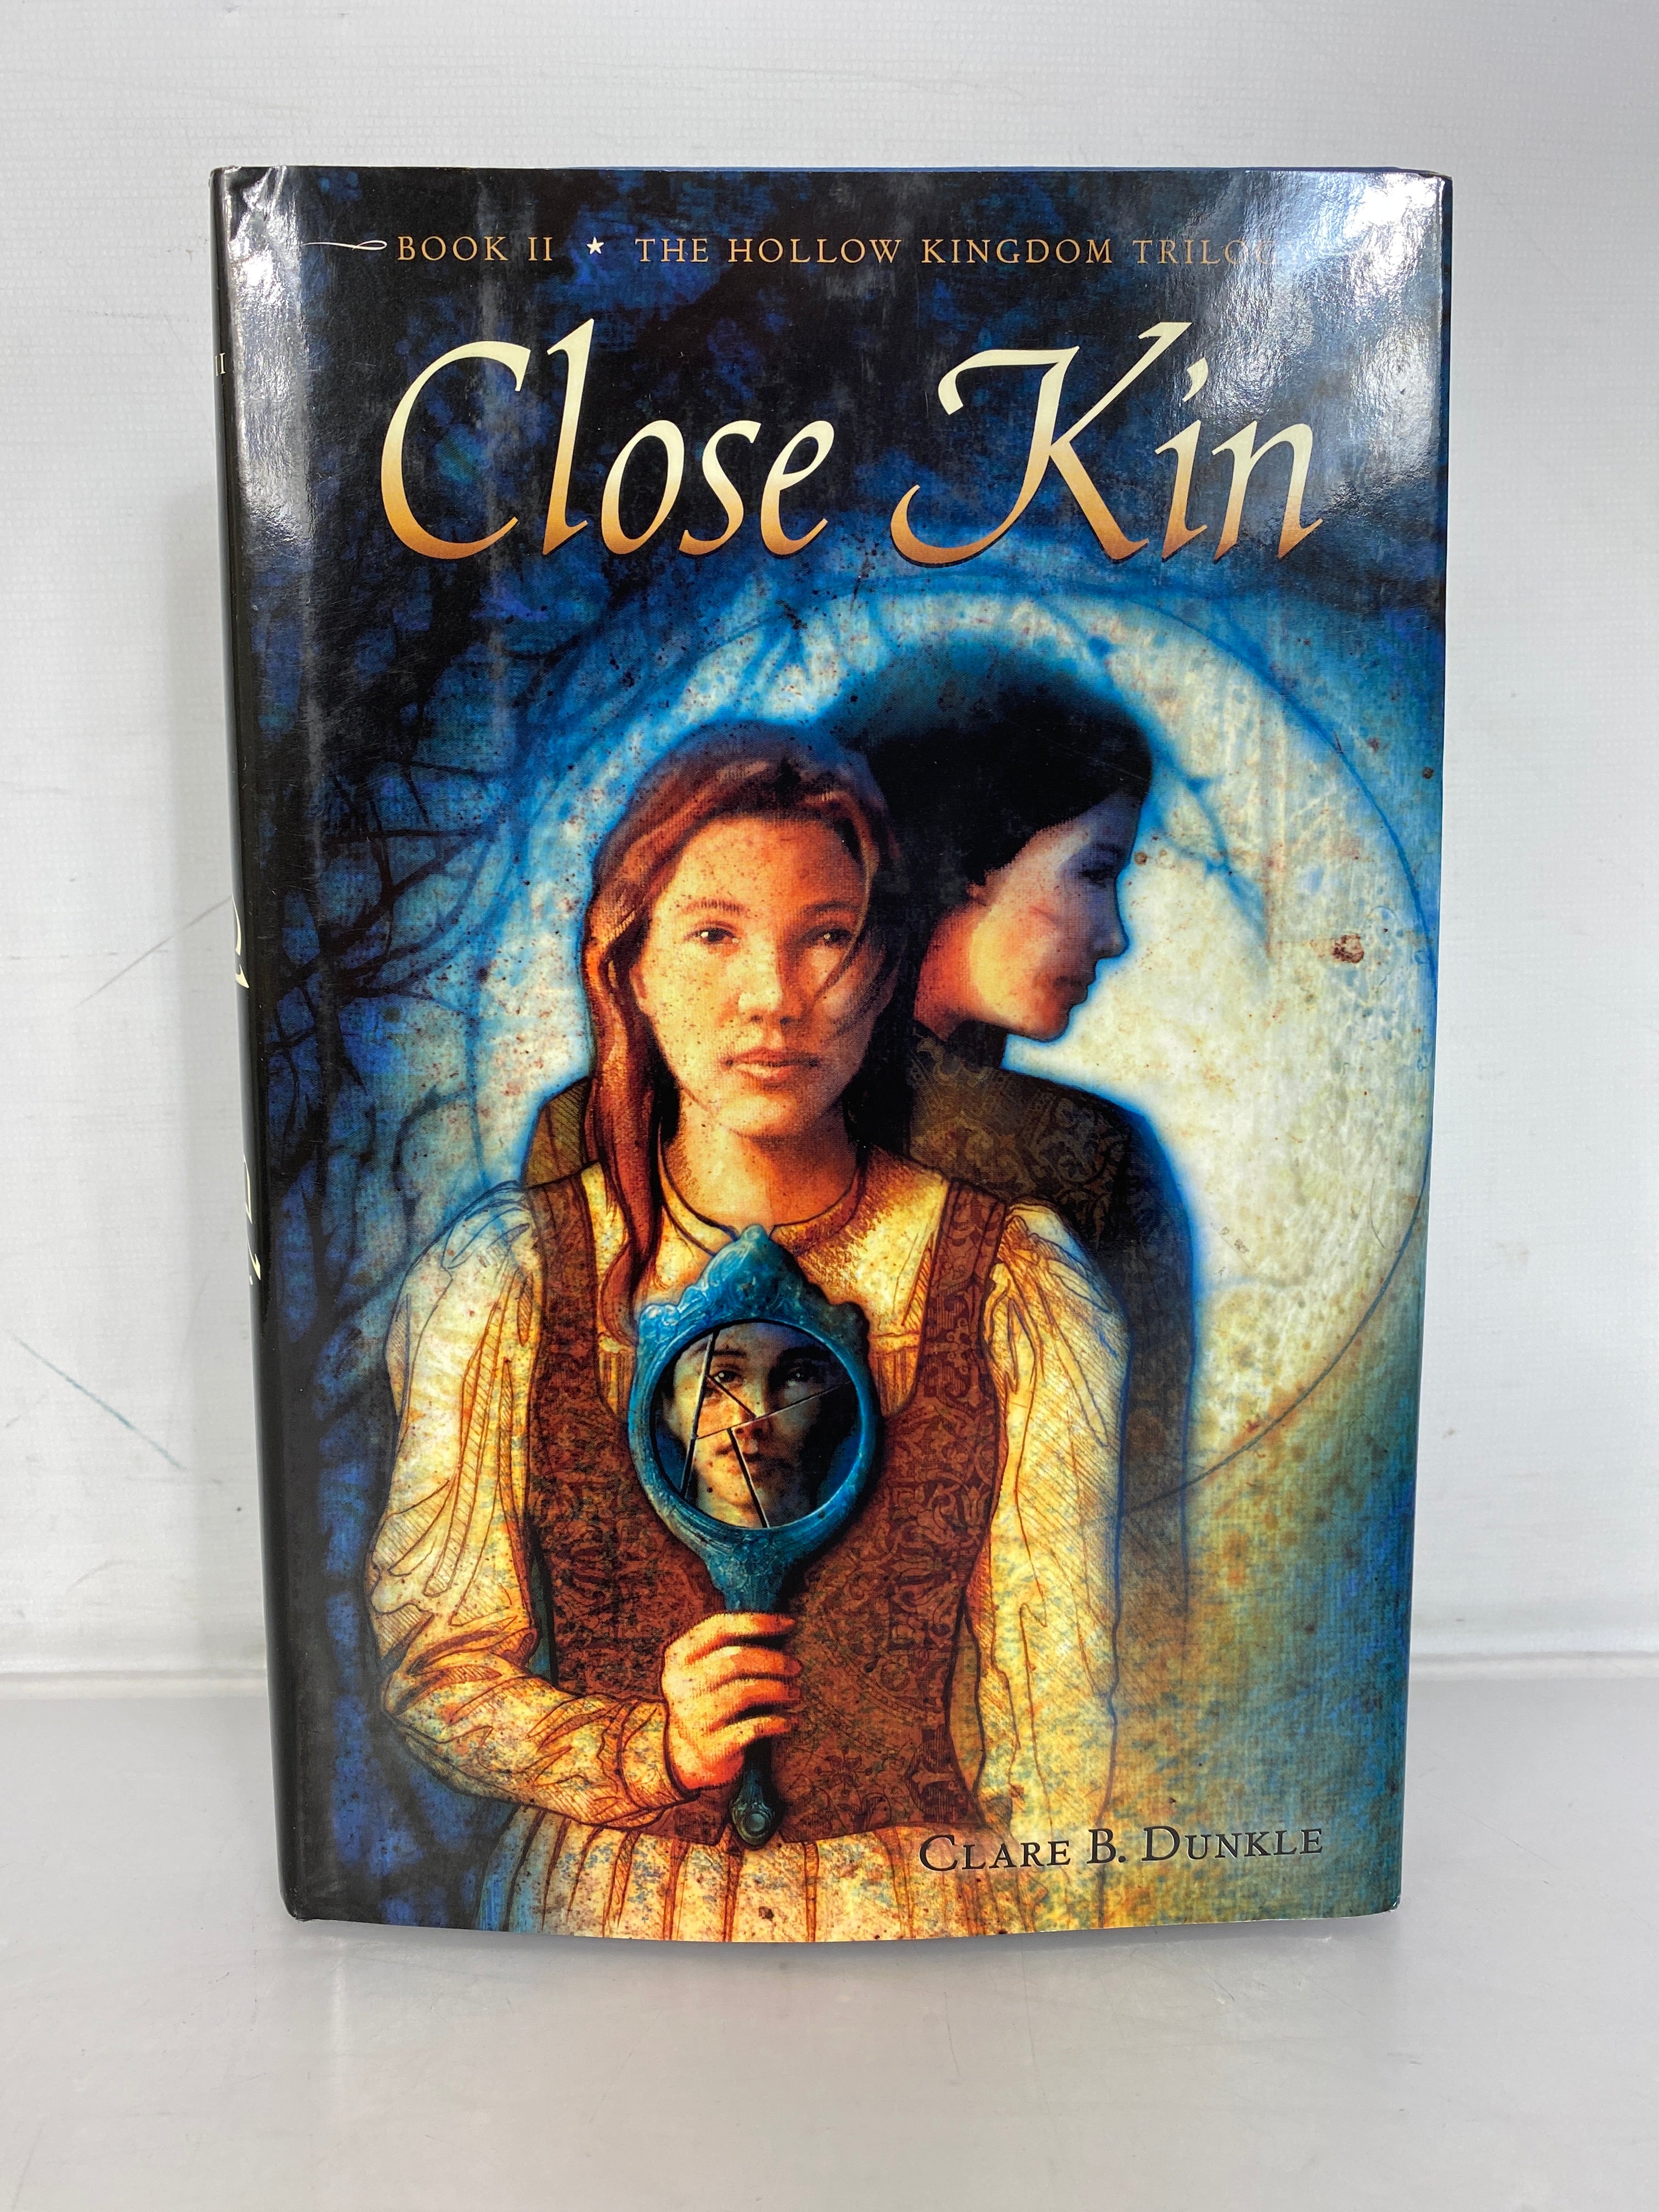 The Hollow Kingdom & Close Kin by Clare Dunkle Signed to Matt Manley HC DJ